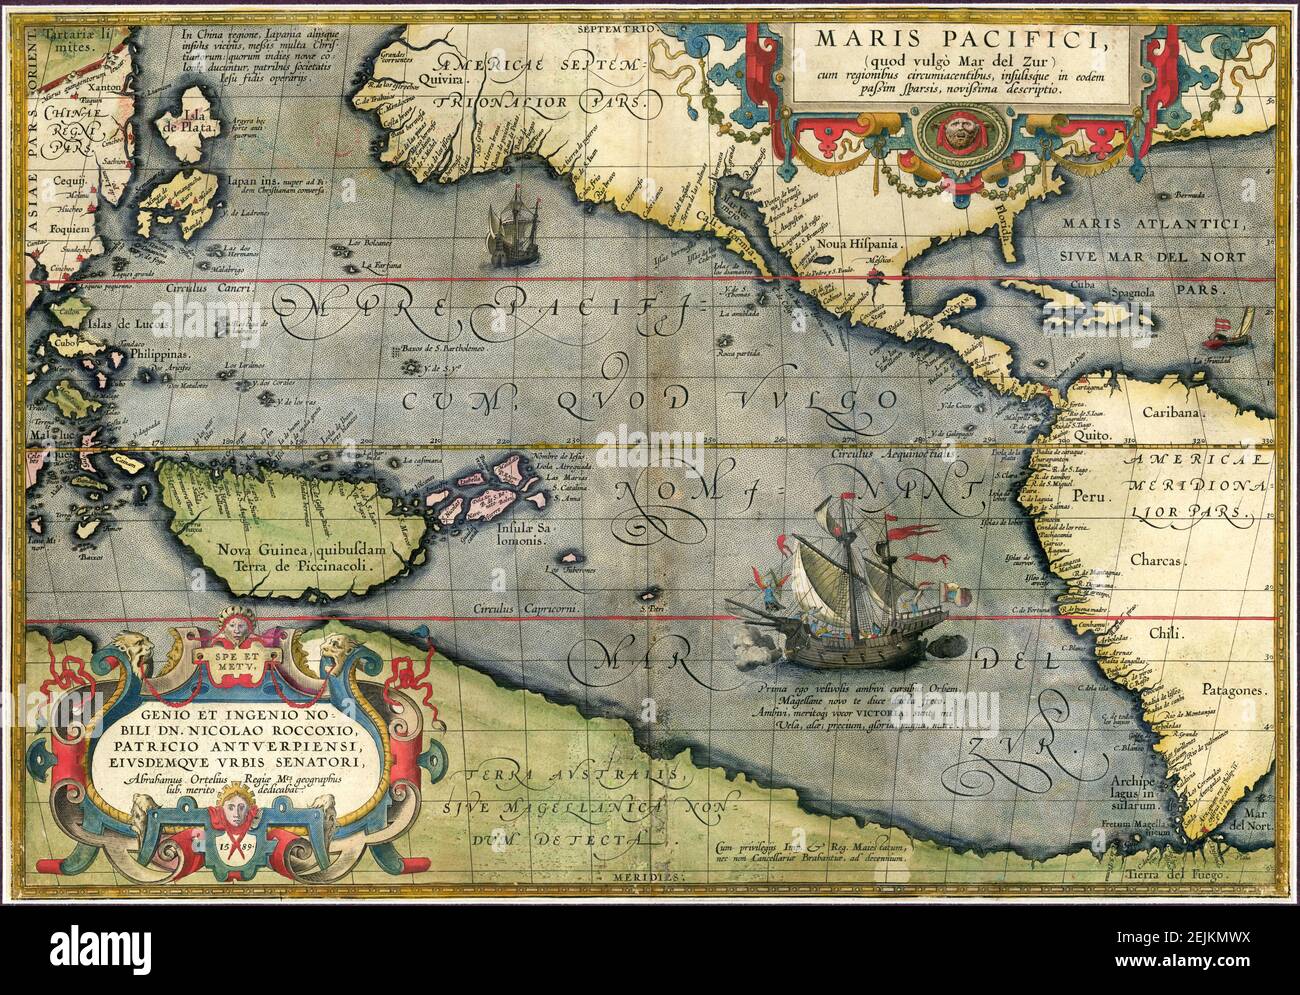 Maris Pacifici by Abraham Ortelius. This map was published in 1589 in his Theatrum Orbis Terrarum. It was not only the first printed map of the Pacific, but it also showed the Americas for the first time. Stock Photo